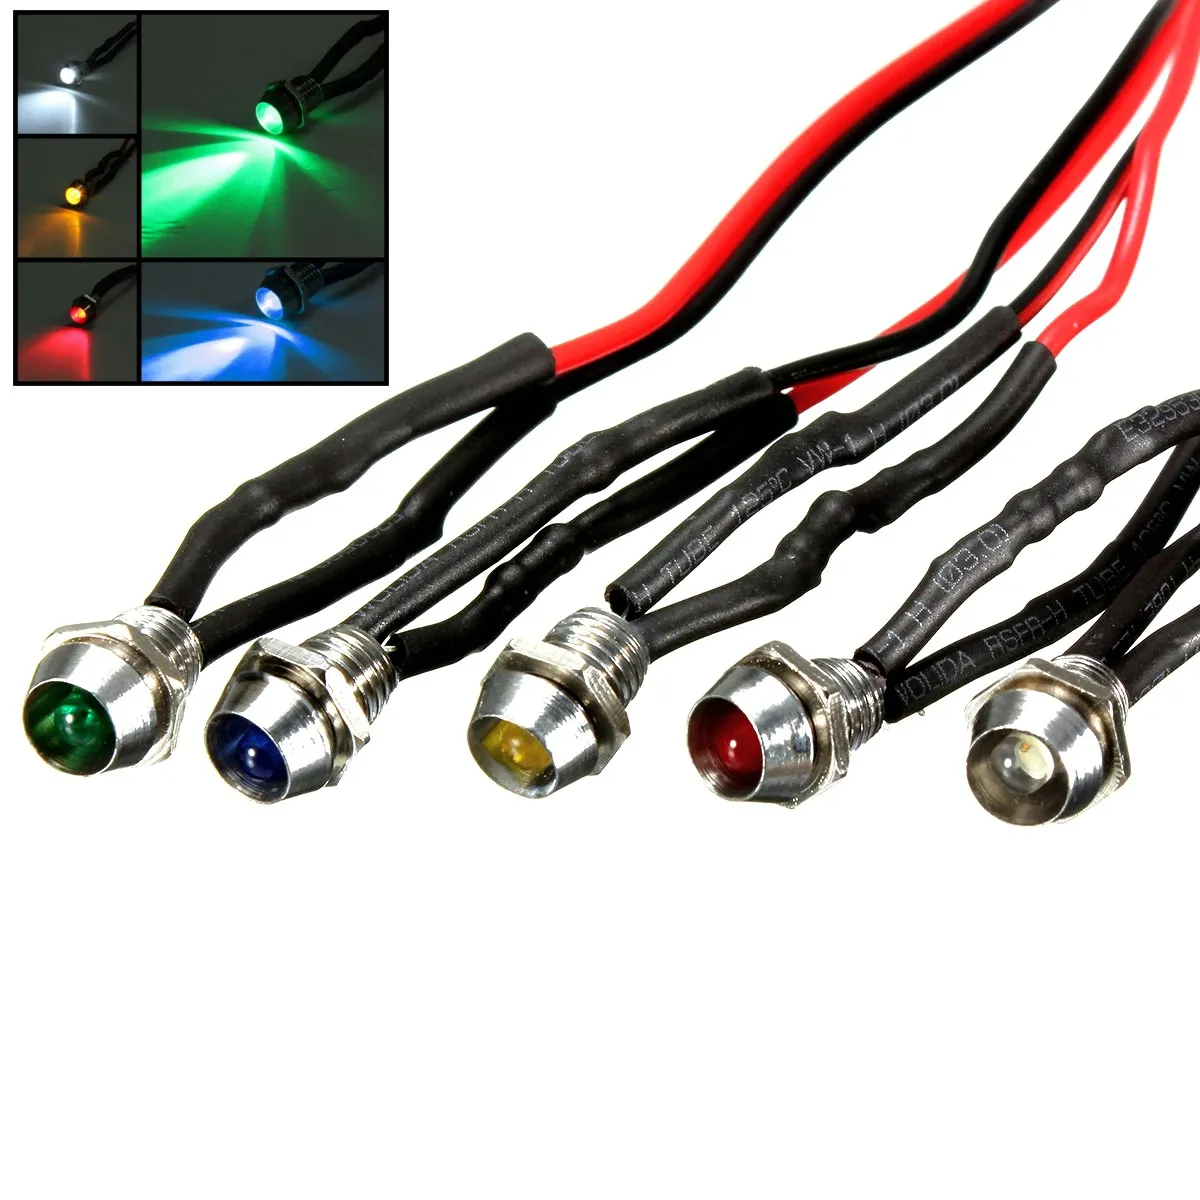 Baoblaze 2pieces 6mm LED Metal Indicator Dash Bulbs Light Lamp 6V with Wire Car Truck Boat 